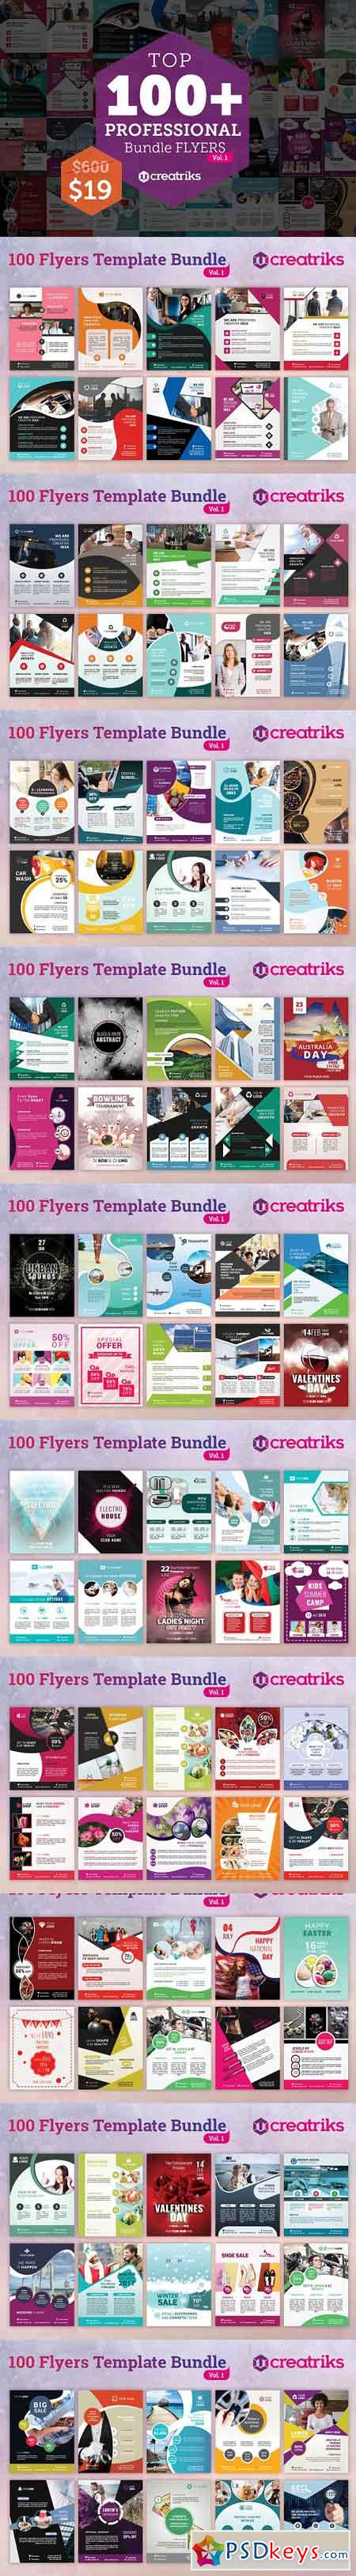 100+ Awesome Flyer Templates 1740696